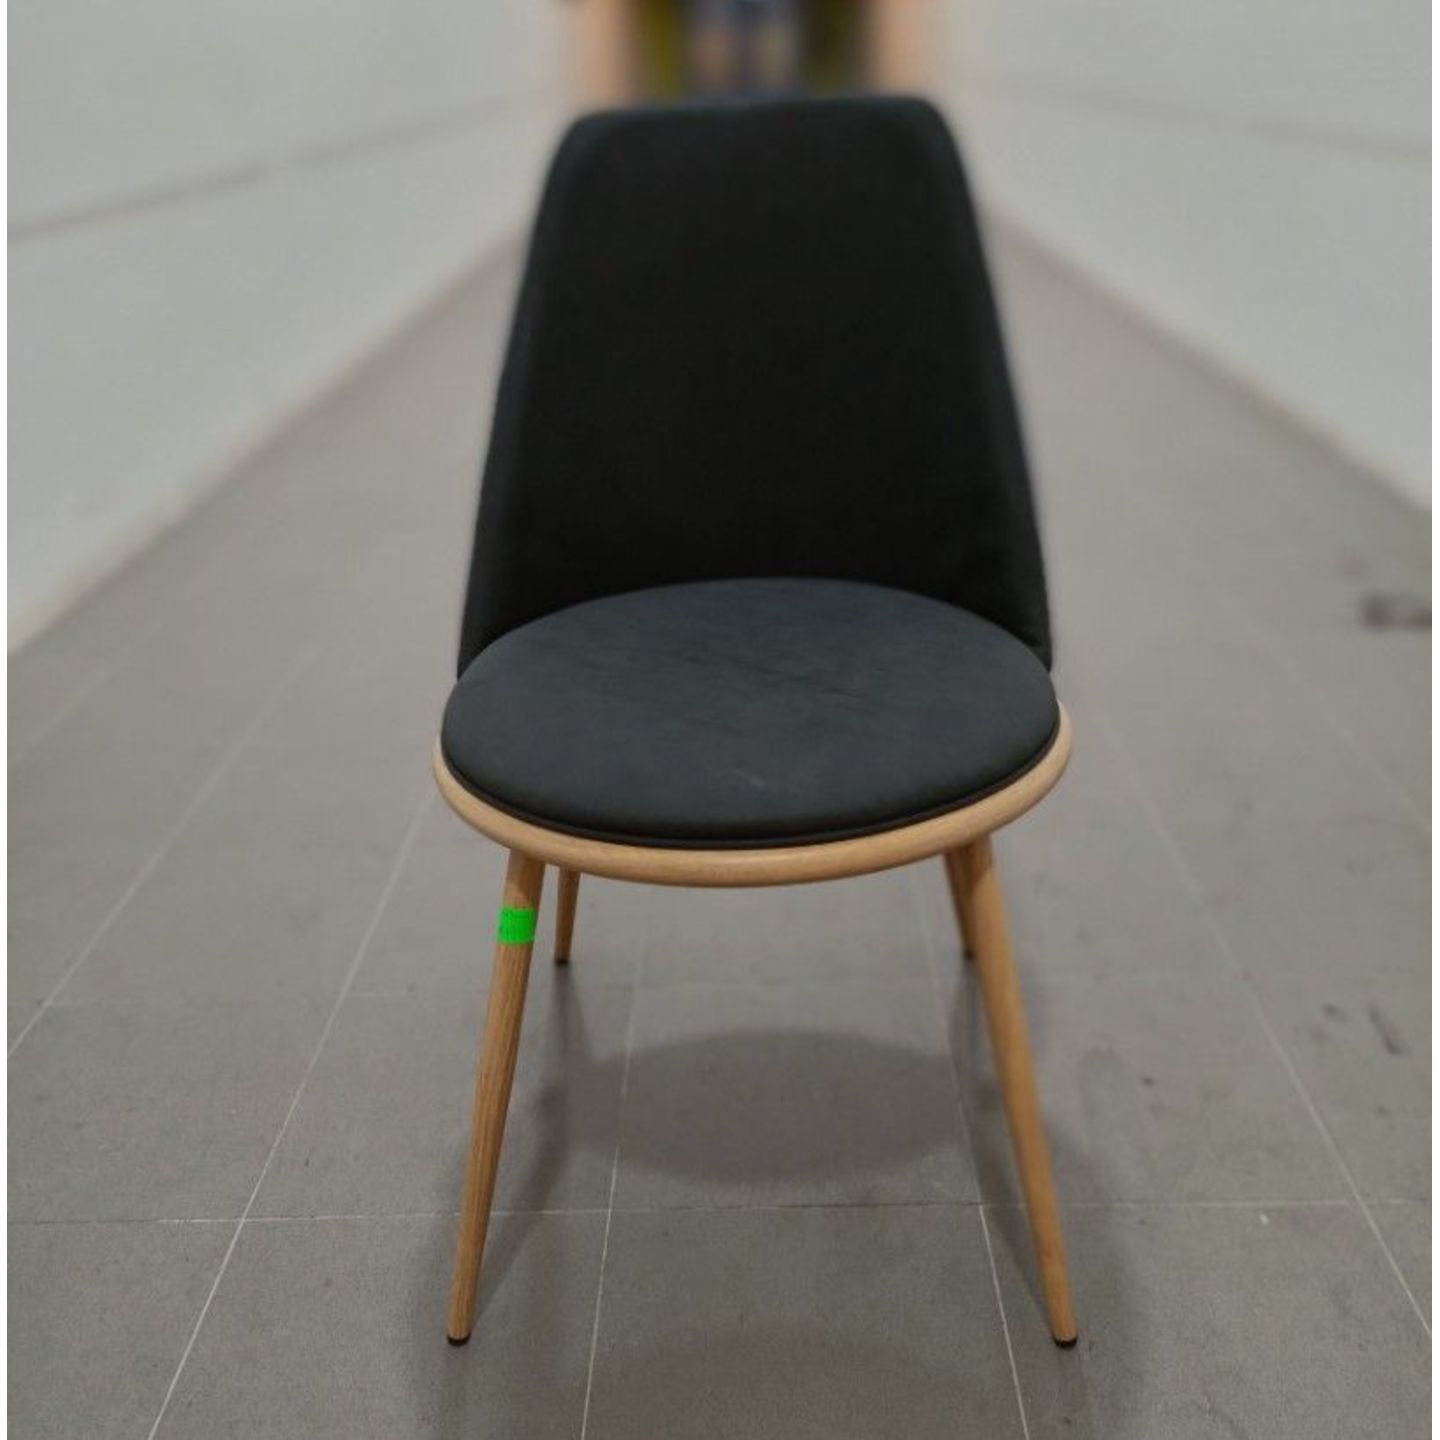 FIRE SALE - RAYLO Chair in MATTE GOLD & Graphite (only piece)